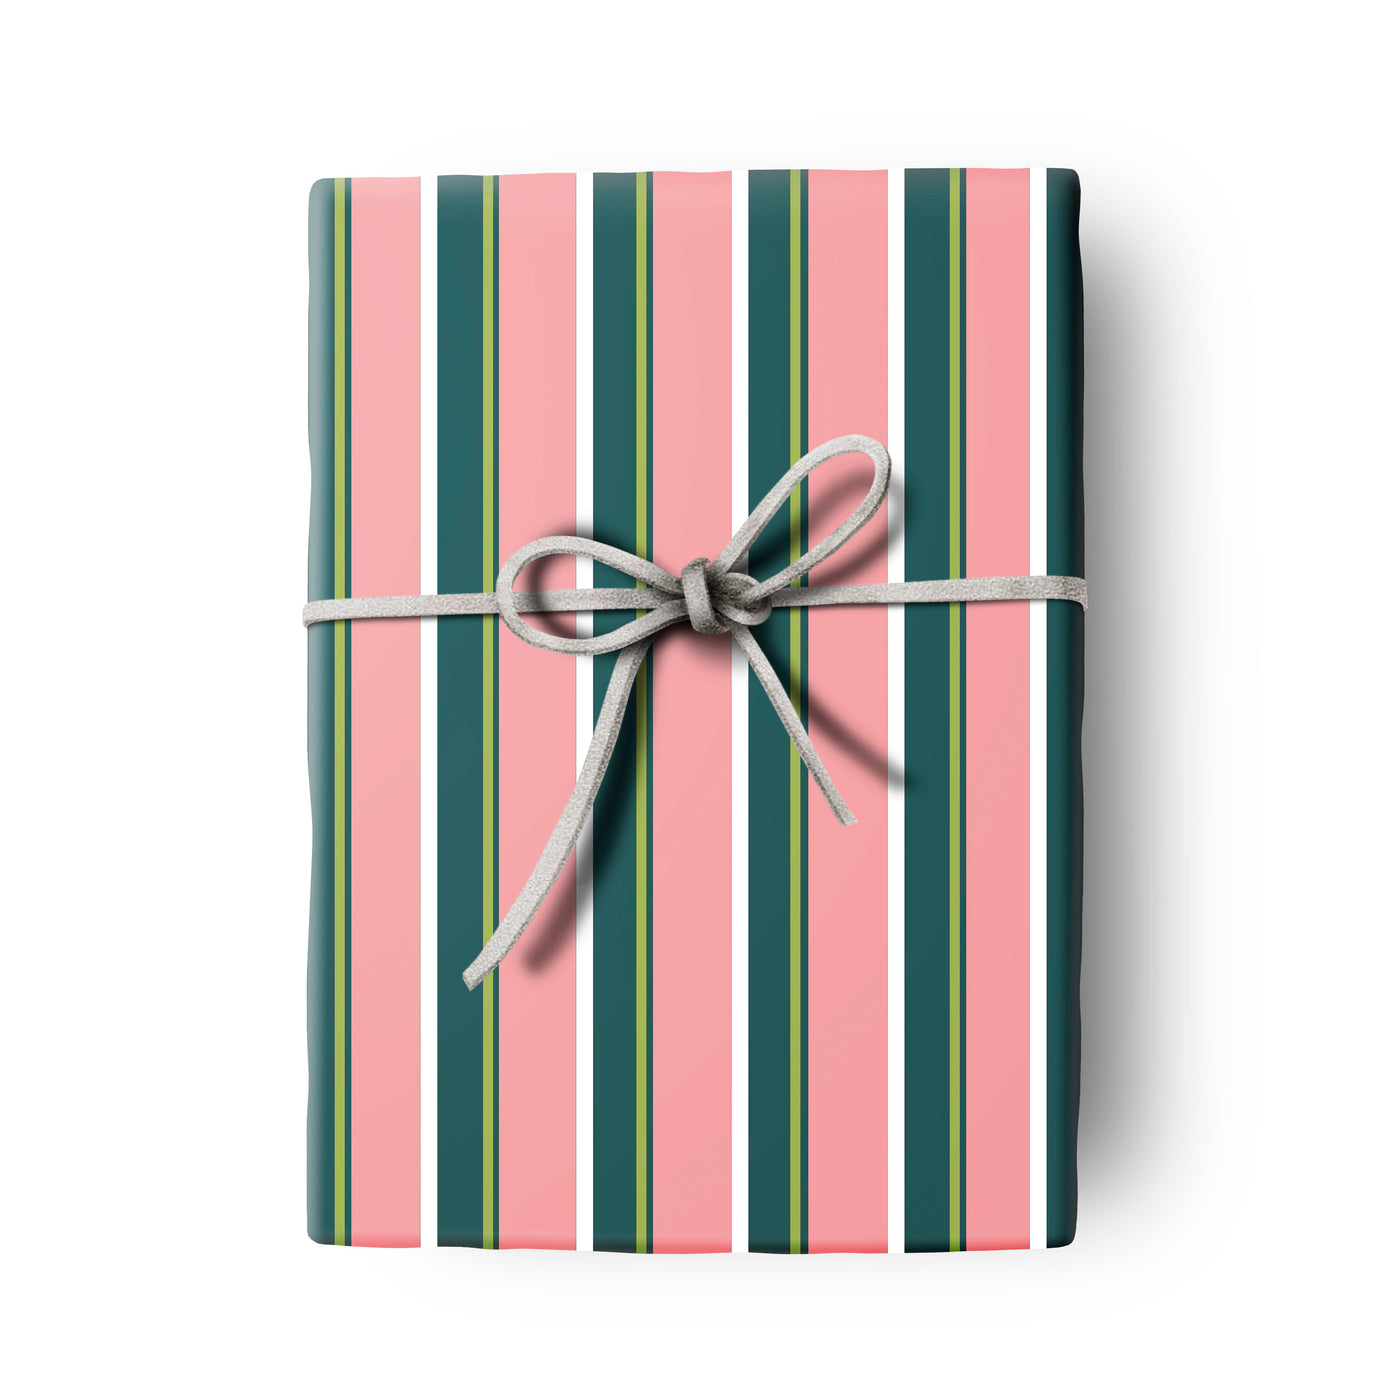 Martini Palm Double Sided Gift Wrap Craft Sheet